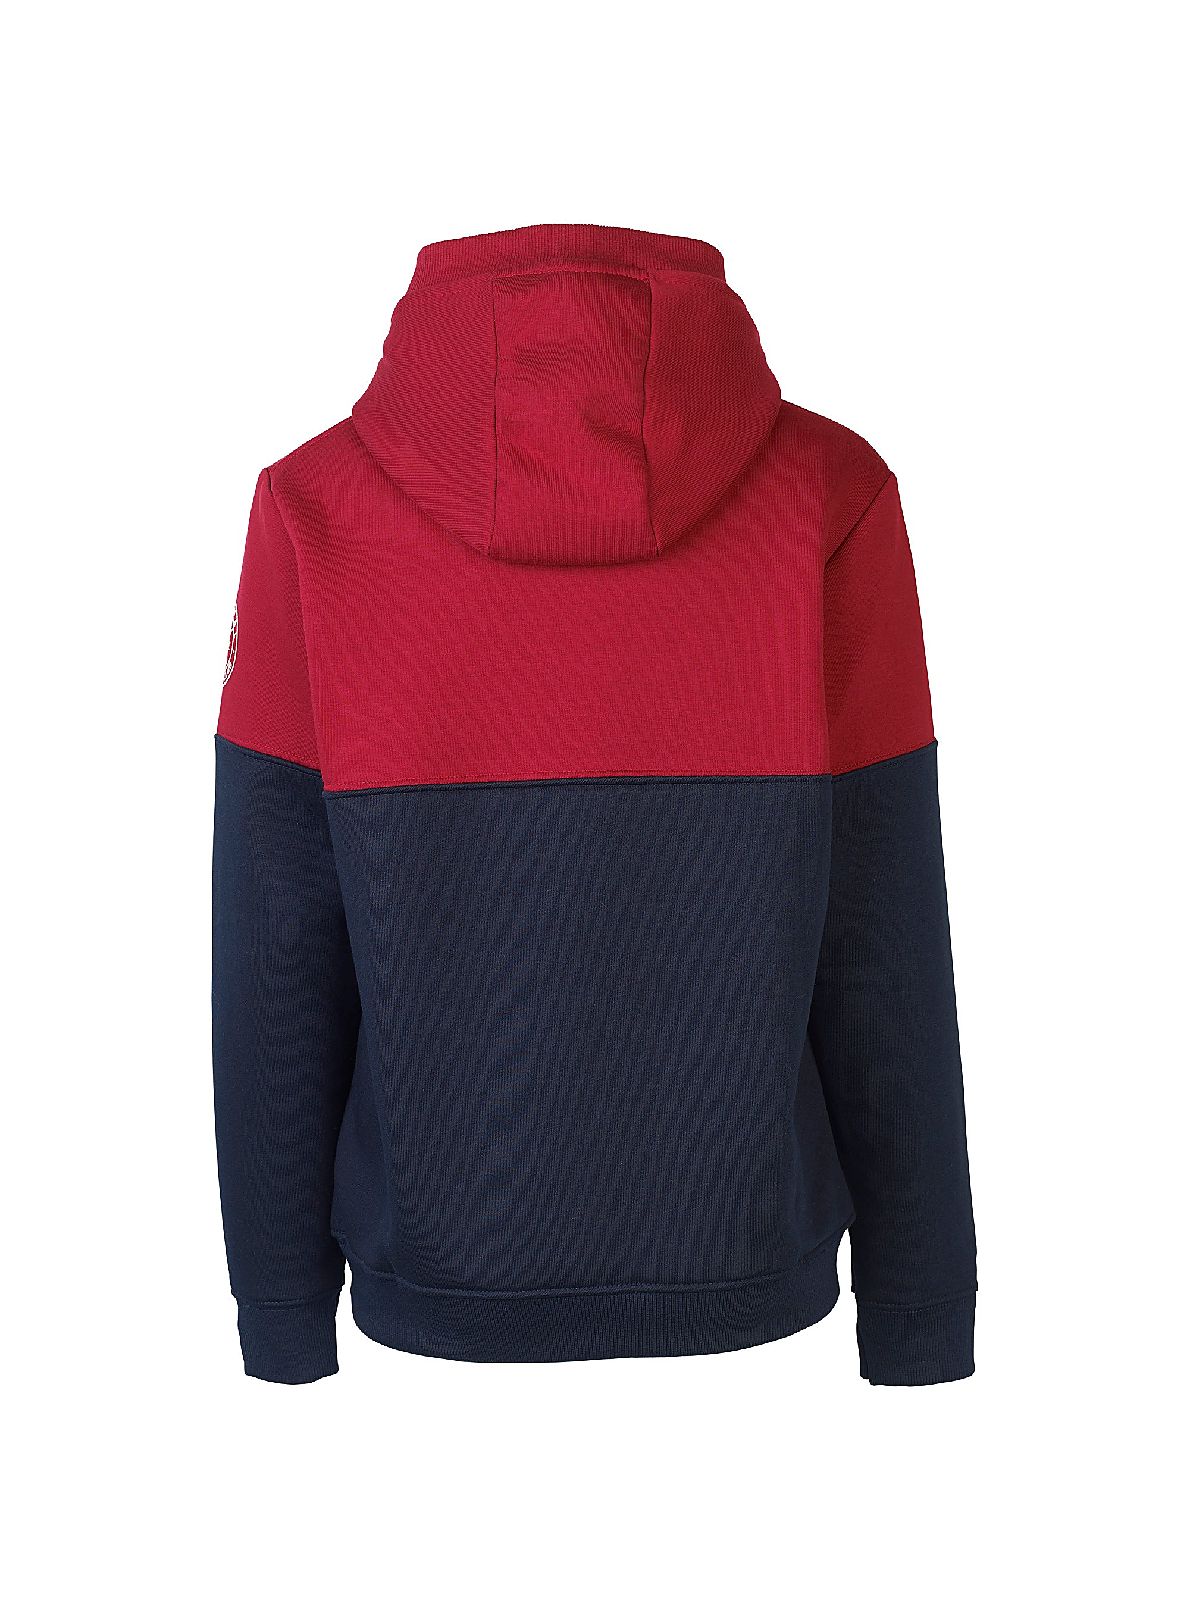 Arsenal Kids Since 1886 Panel Hoodie | Official Online Store